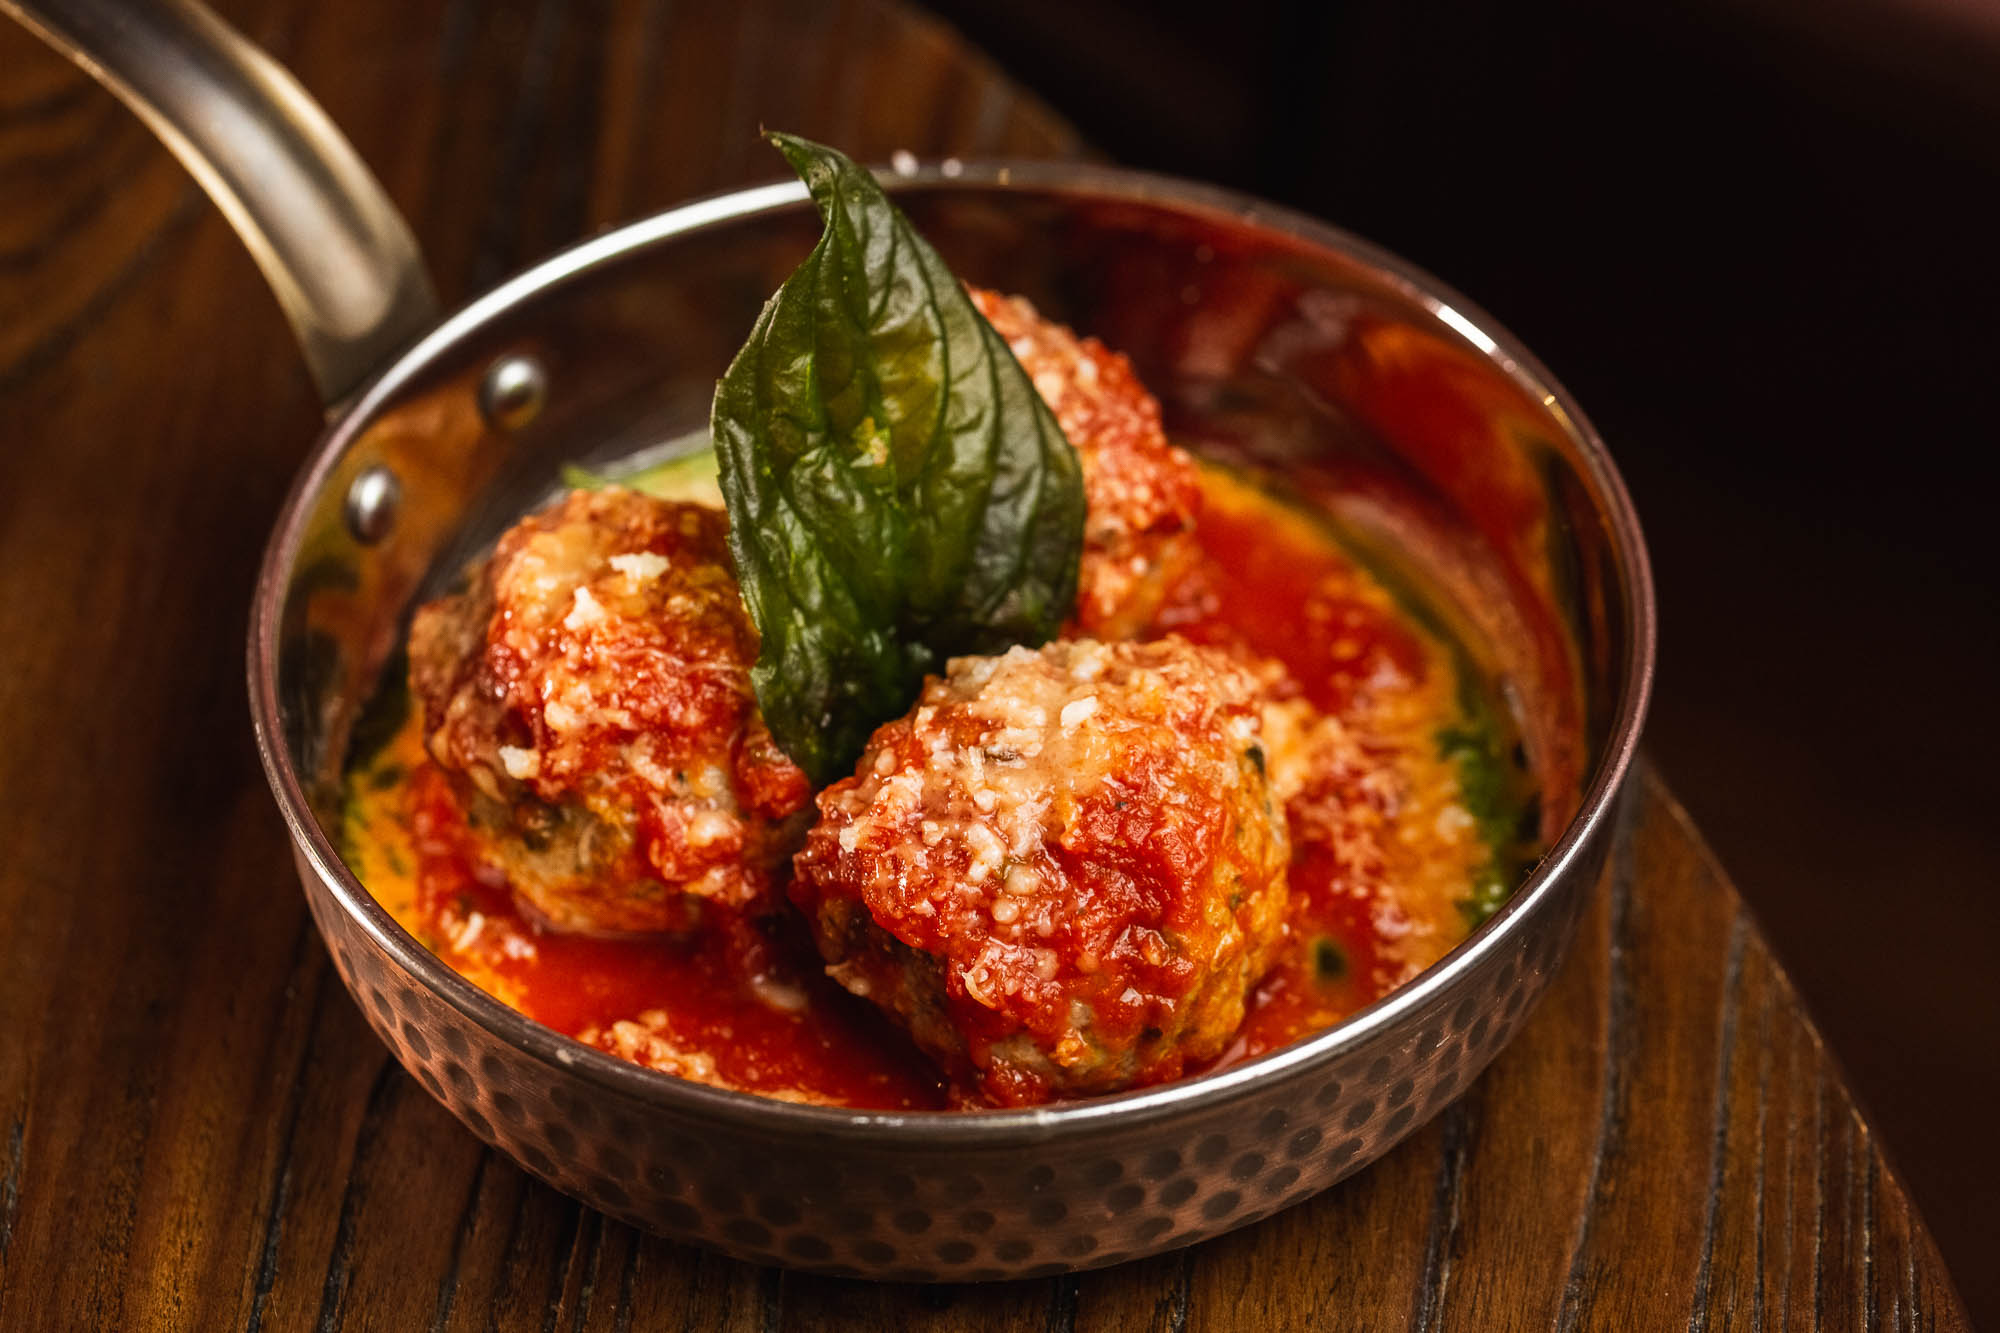 Three meatballs in a tomato sauce, topped with Parmesan and basil